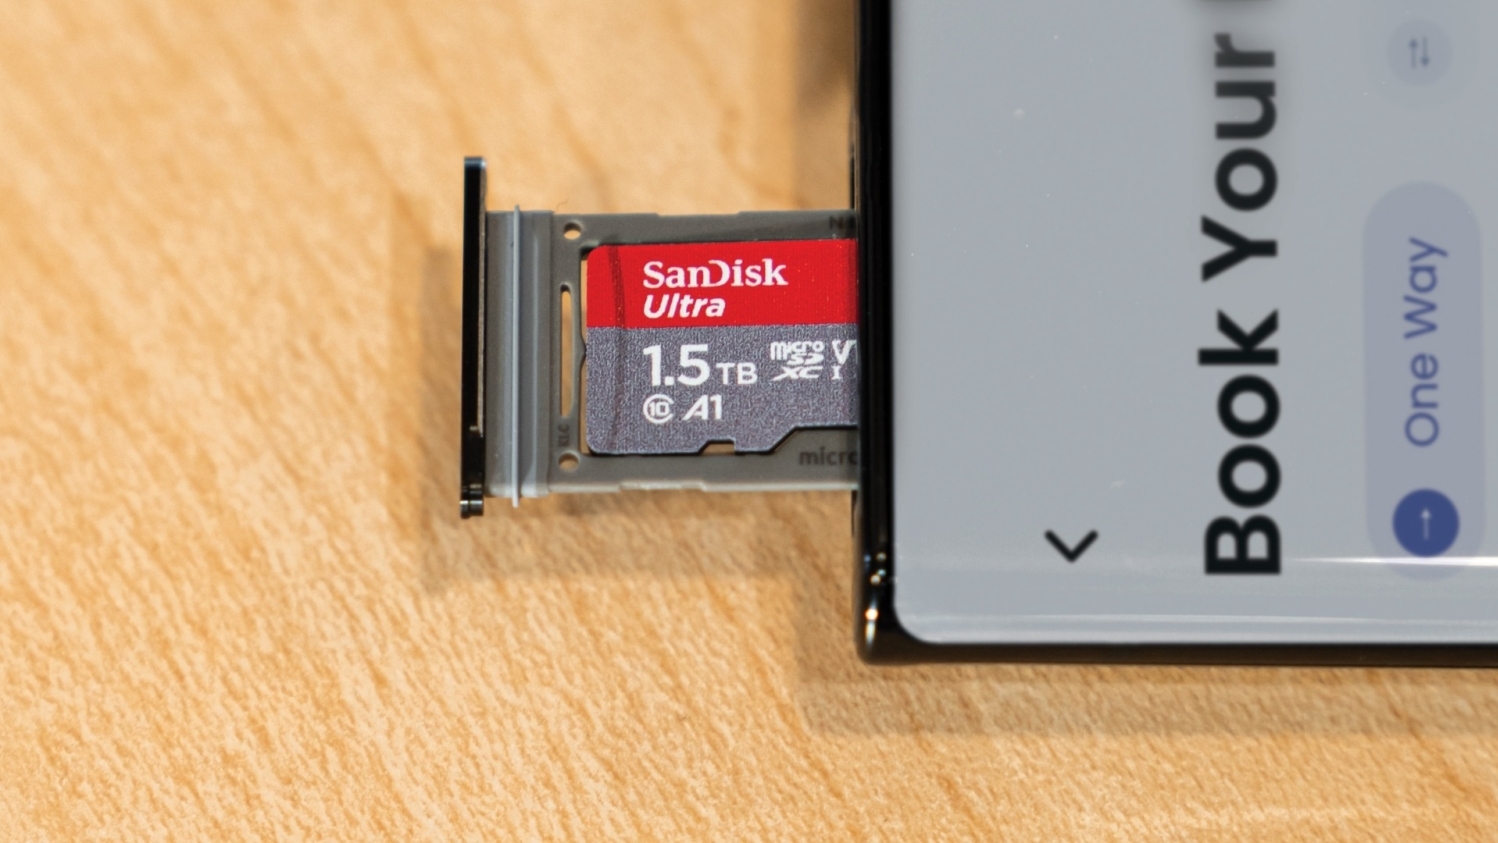 SanDisk Ultra microSD UHS-I cards deliver the world's fastest 1.5